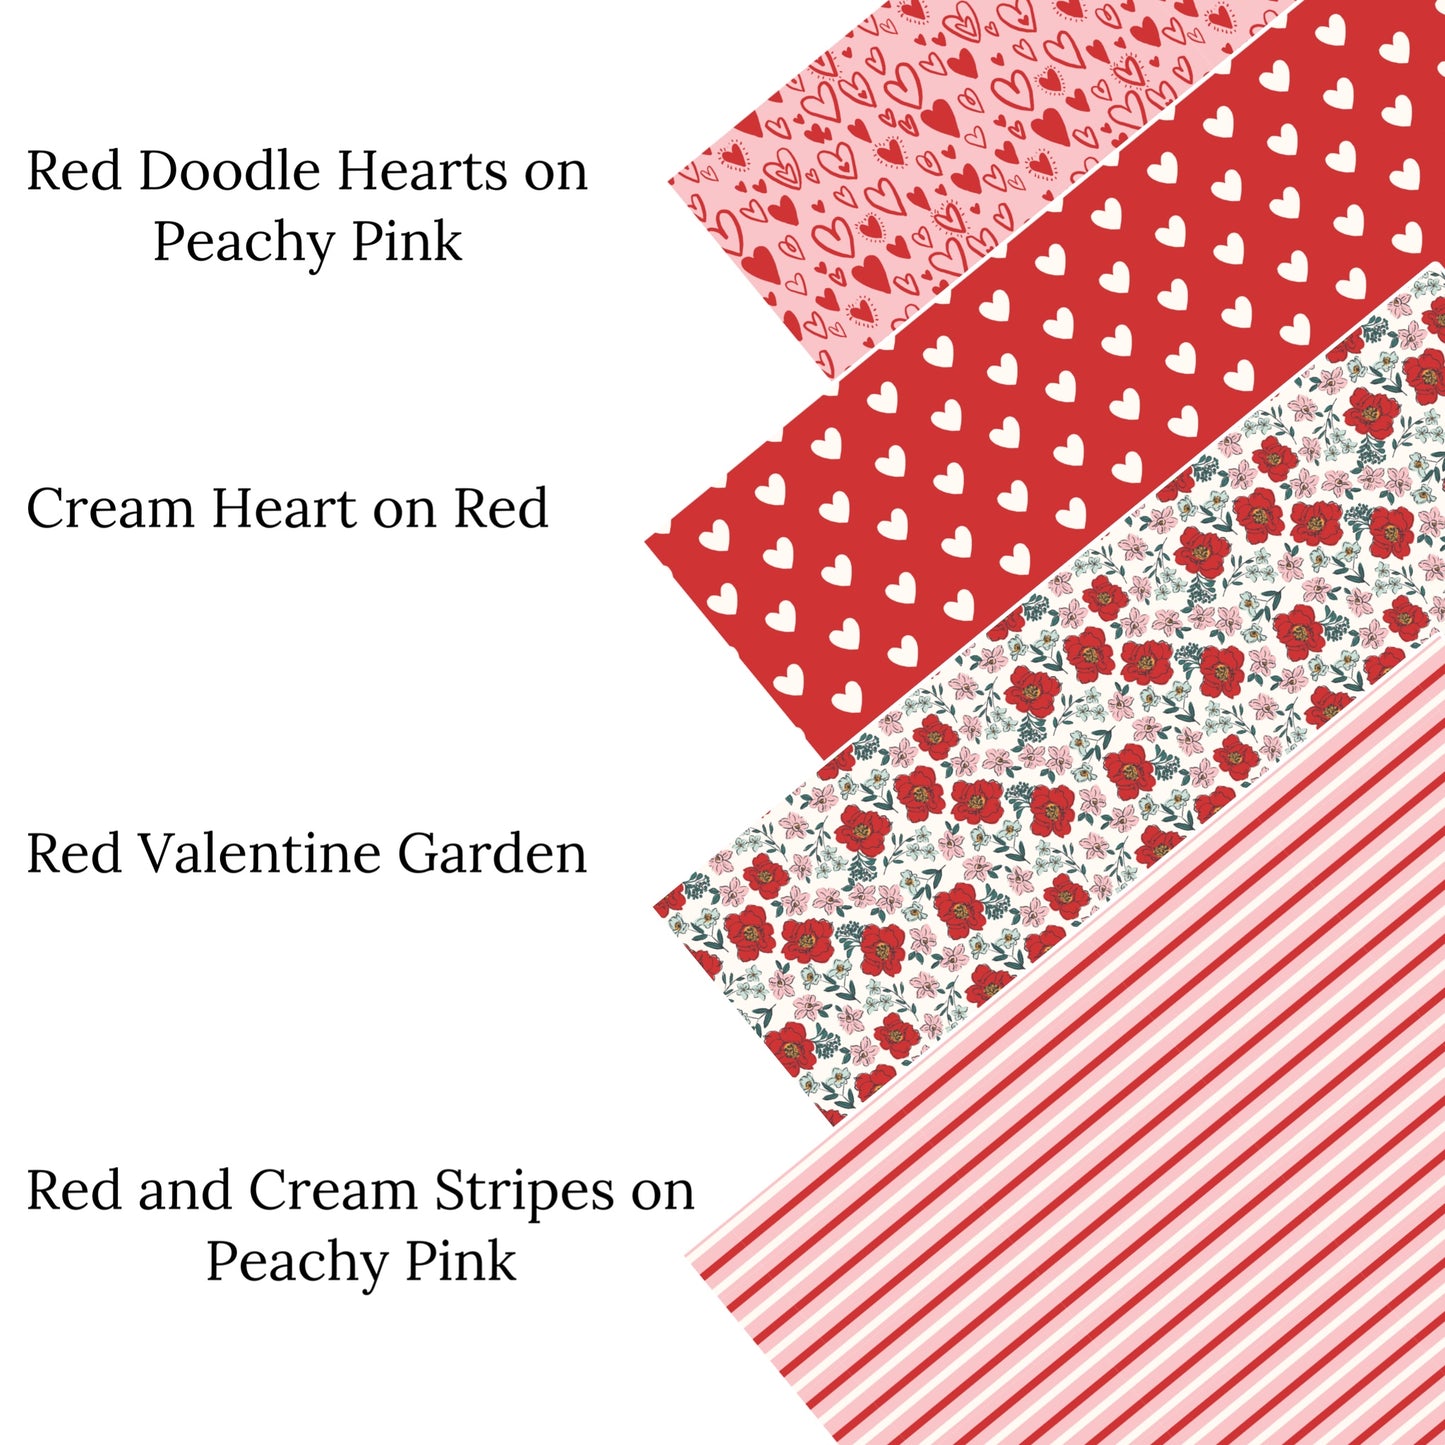 Red Doodle Hearts on Peachy Pink Faux Leather Sheets